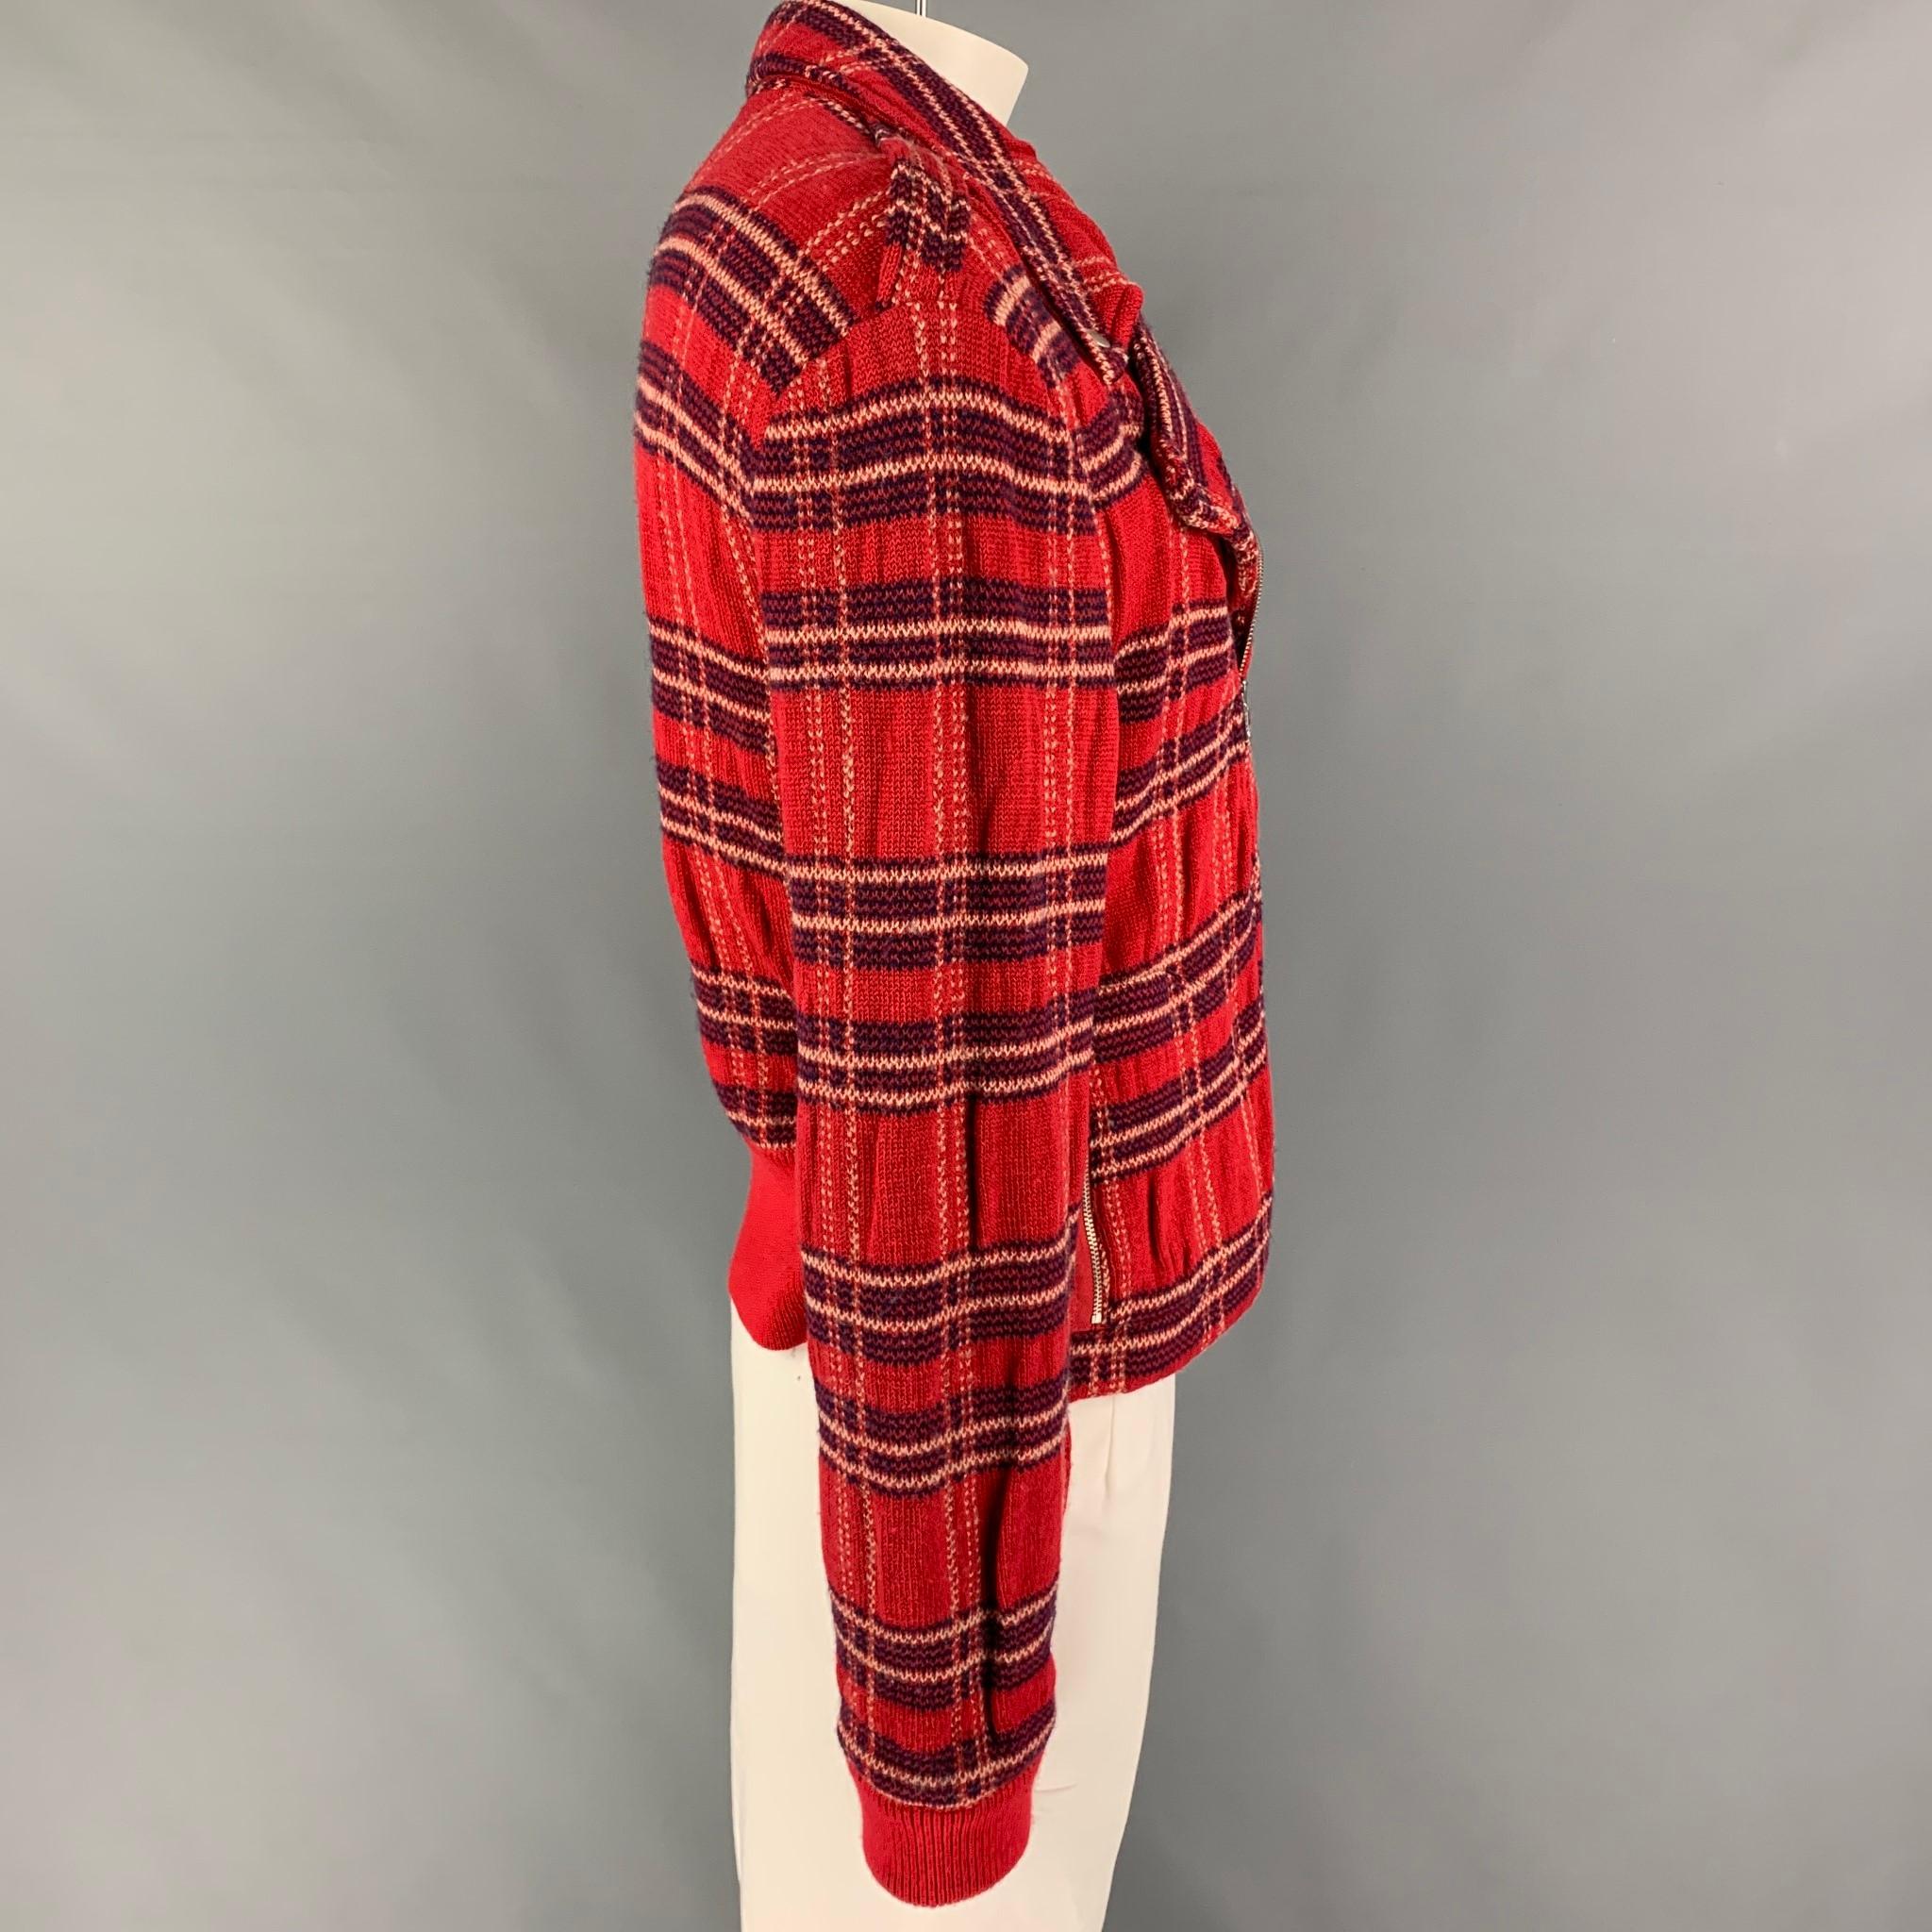 MARC by MARC JACOBS jacket comes in a red & navy knitted plaid wool featuring a biker style, zipper pockets, silver tone hardware, and a zip up closure. 

Very Good Pre-Owned Condition.
Marked: XL

Measurements:

Shoulder: 22 in.
Chest: 44